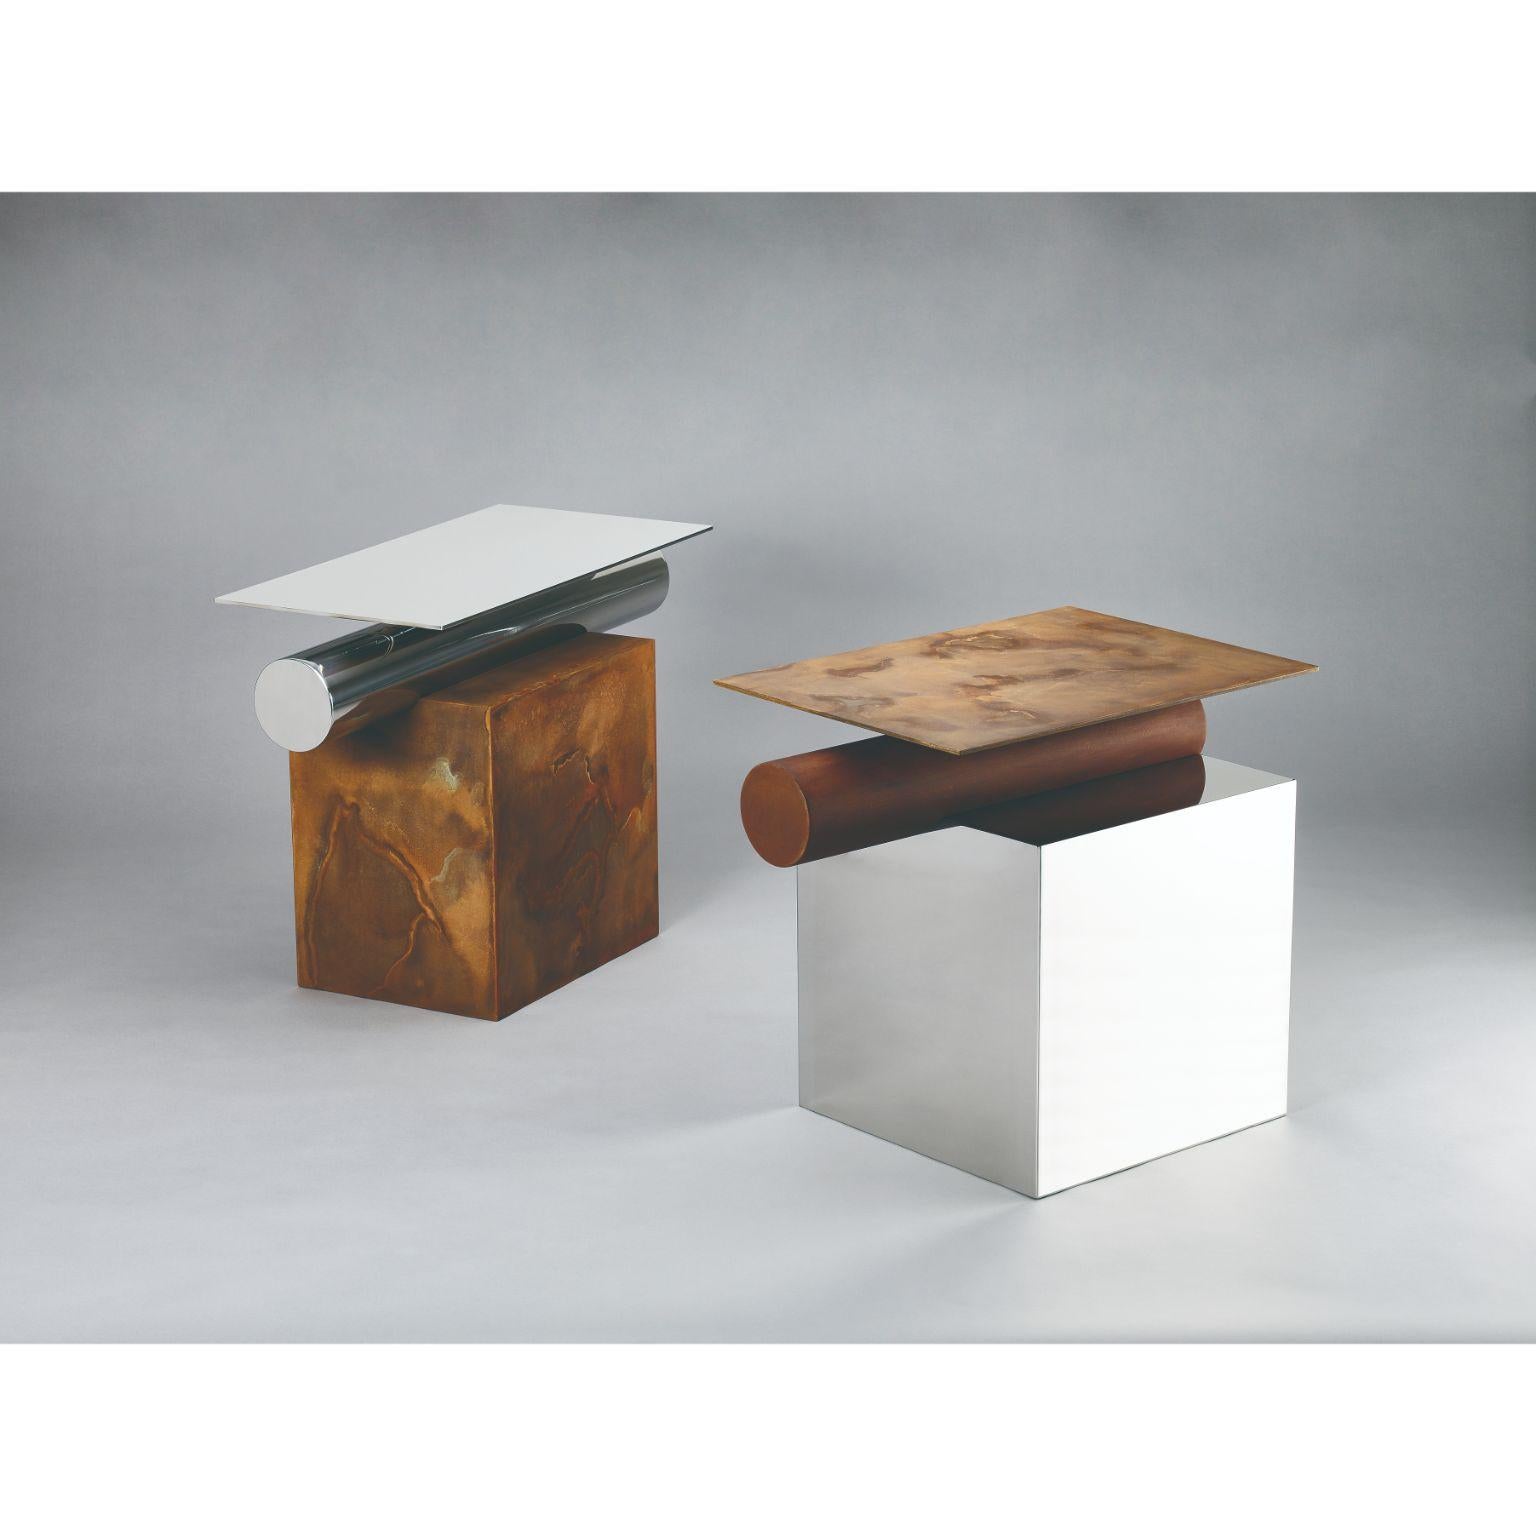 Set of 2 Gwol side table by Lee Jung Hoon
Dimensions: D80 x W33 x H52cm and D60 x W40 x H52 cm
Materials: Stainless steel, Iron Corrosion.

This work is designed under the theme of coexistence between the past and the future. Time has